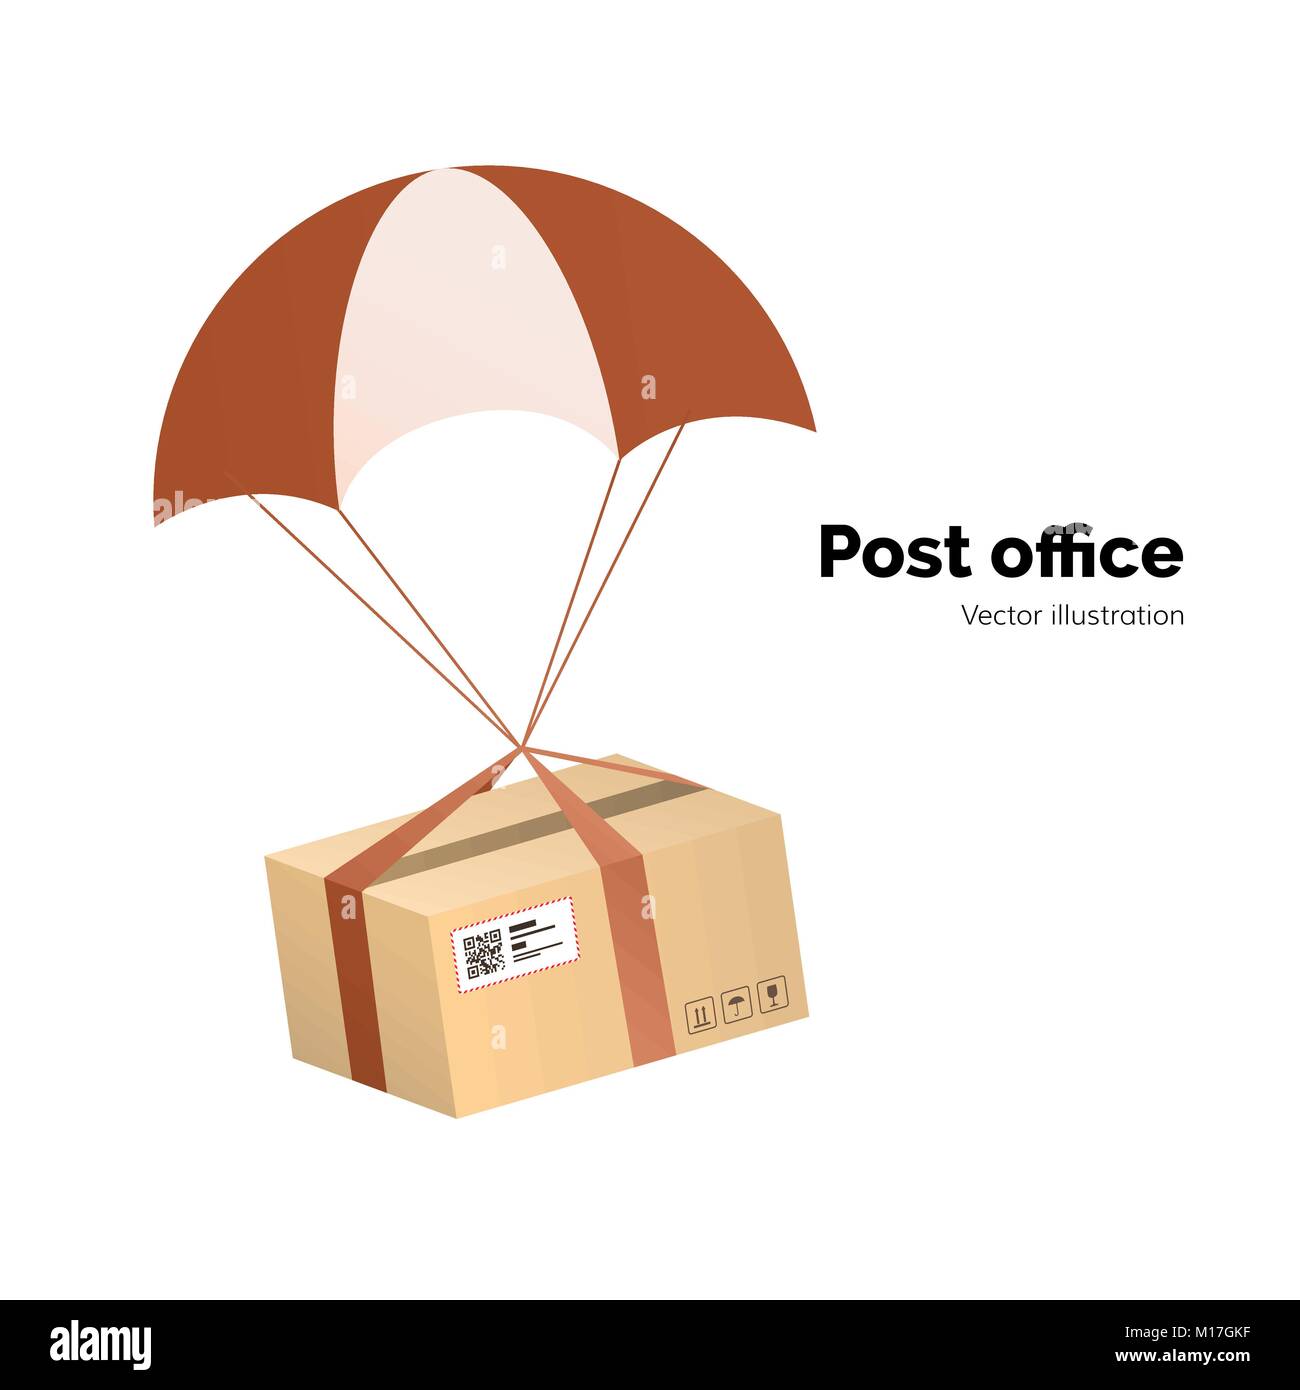 Post office. airmail delivery service. Packege with label, QR code. parcel with parachute for shipping, flat vector illustration Stock Vector